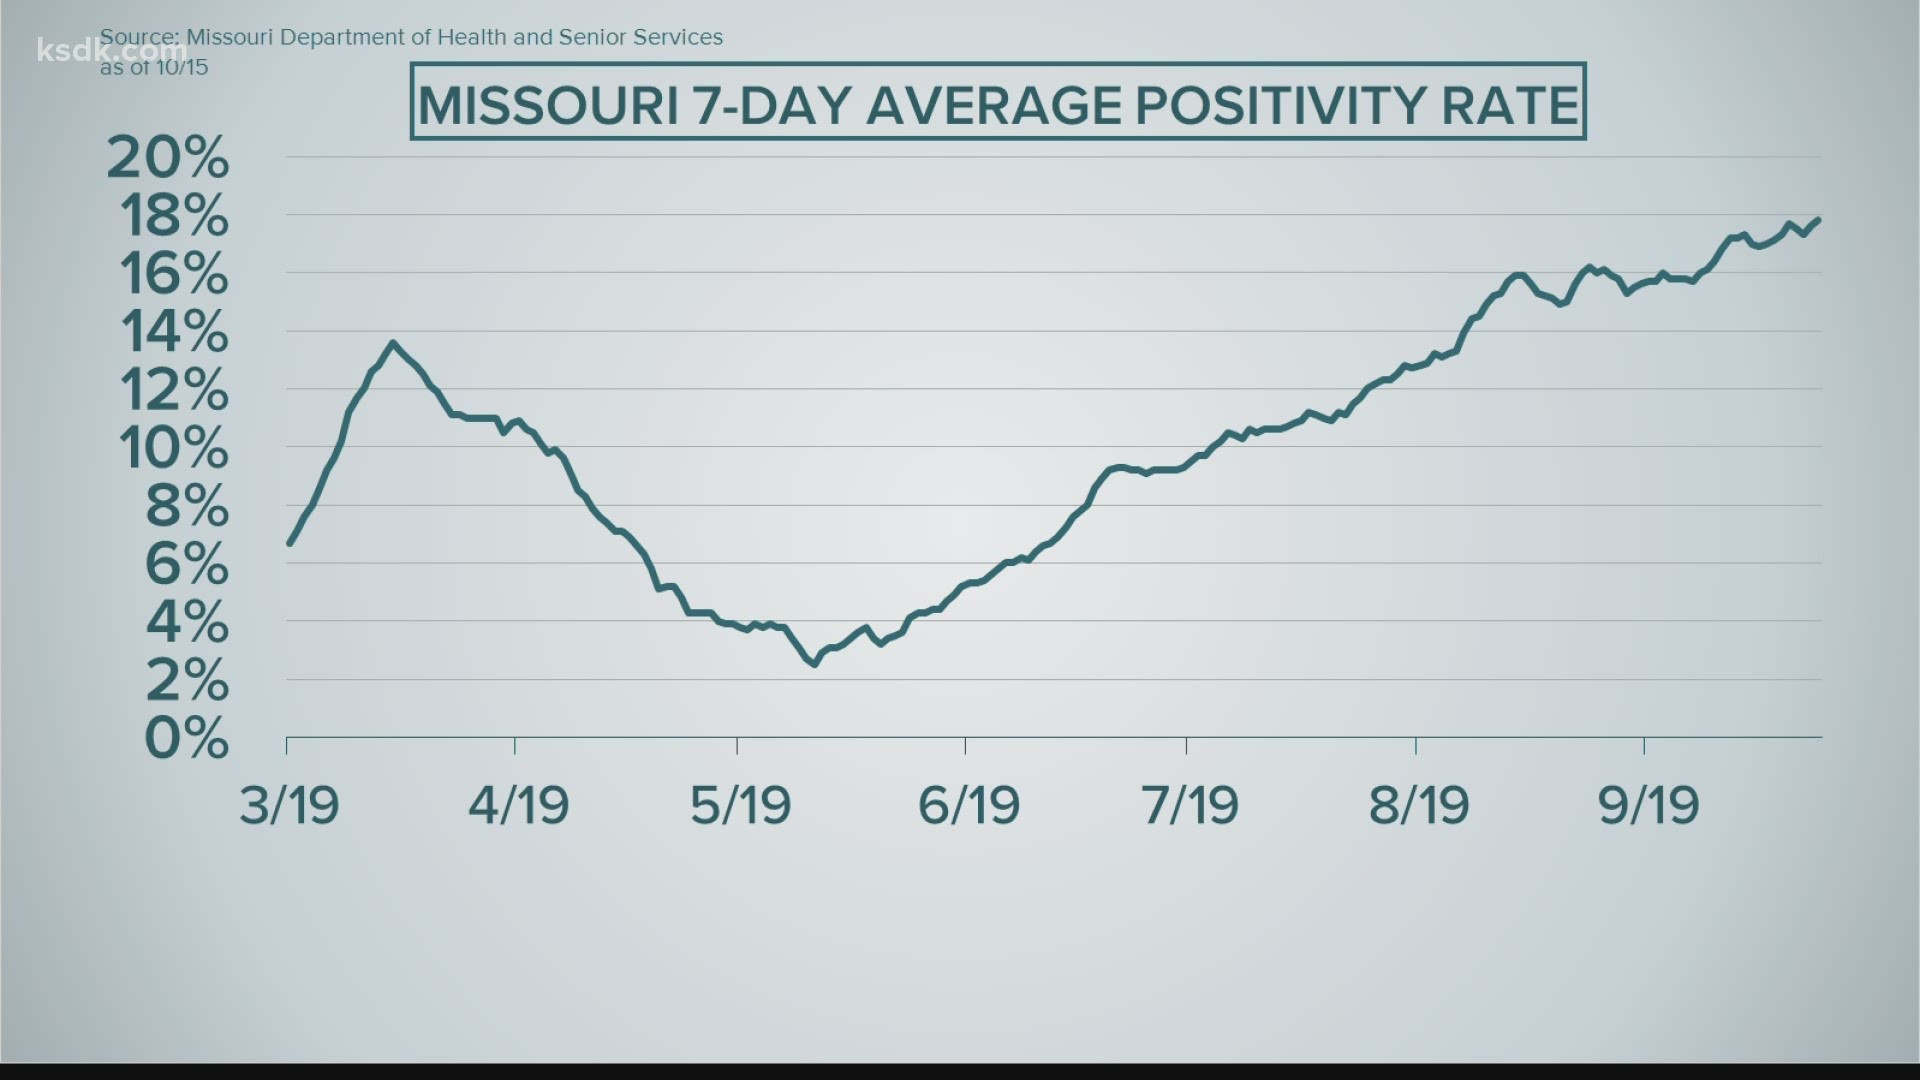 The 7-day average positivity rate is now at an all-time high